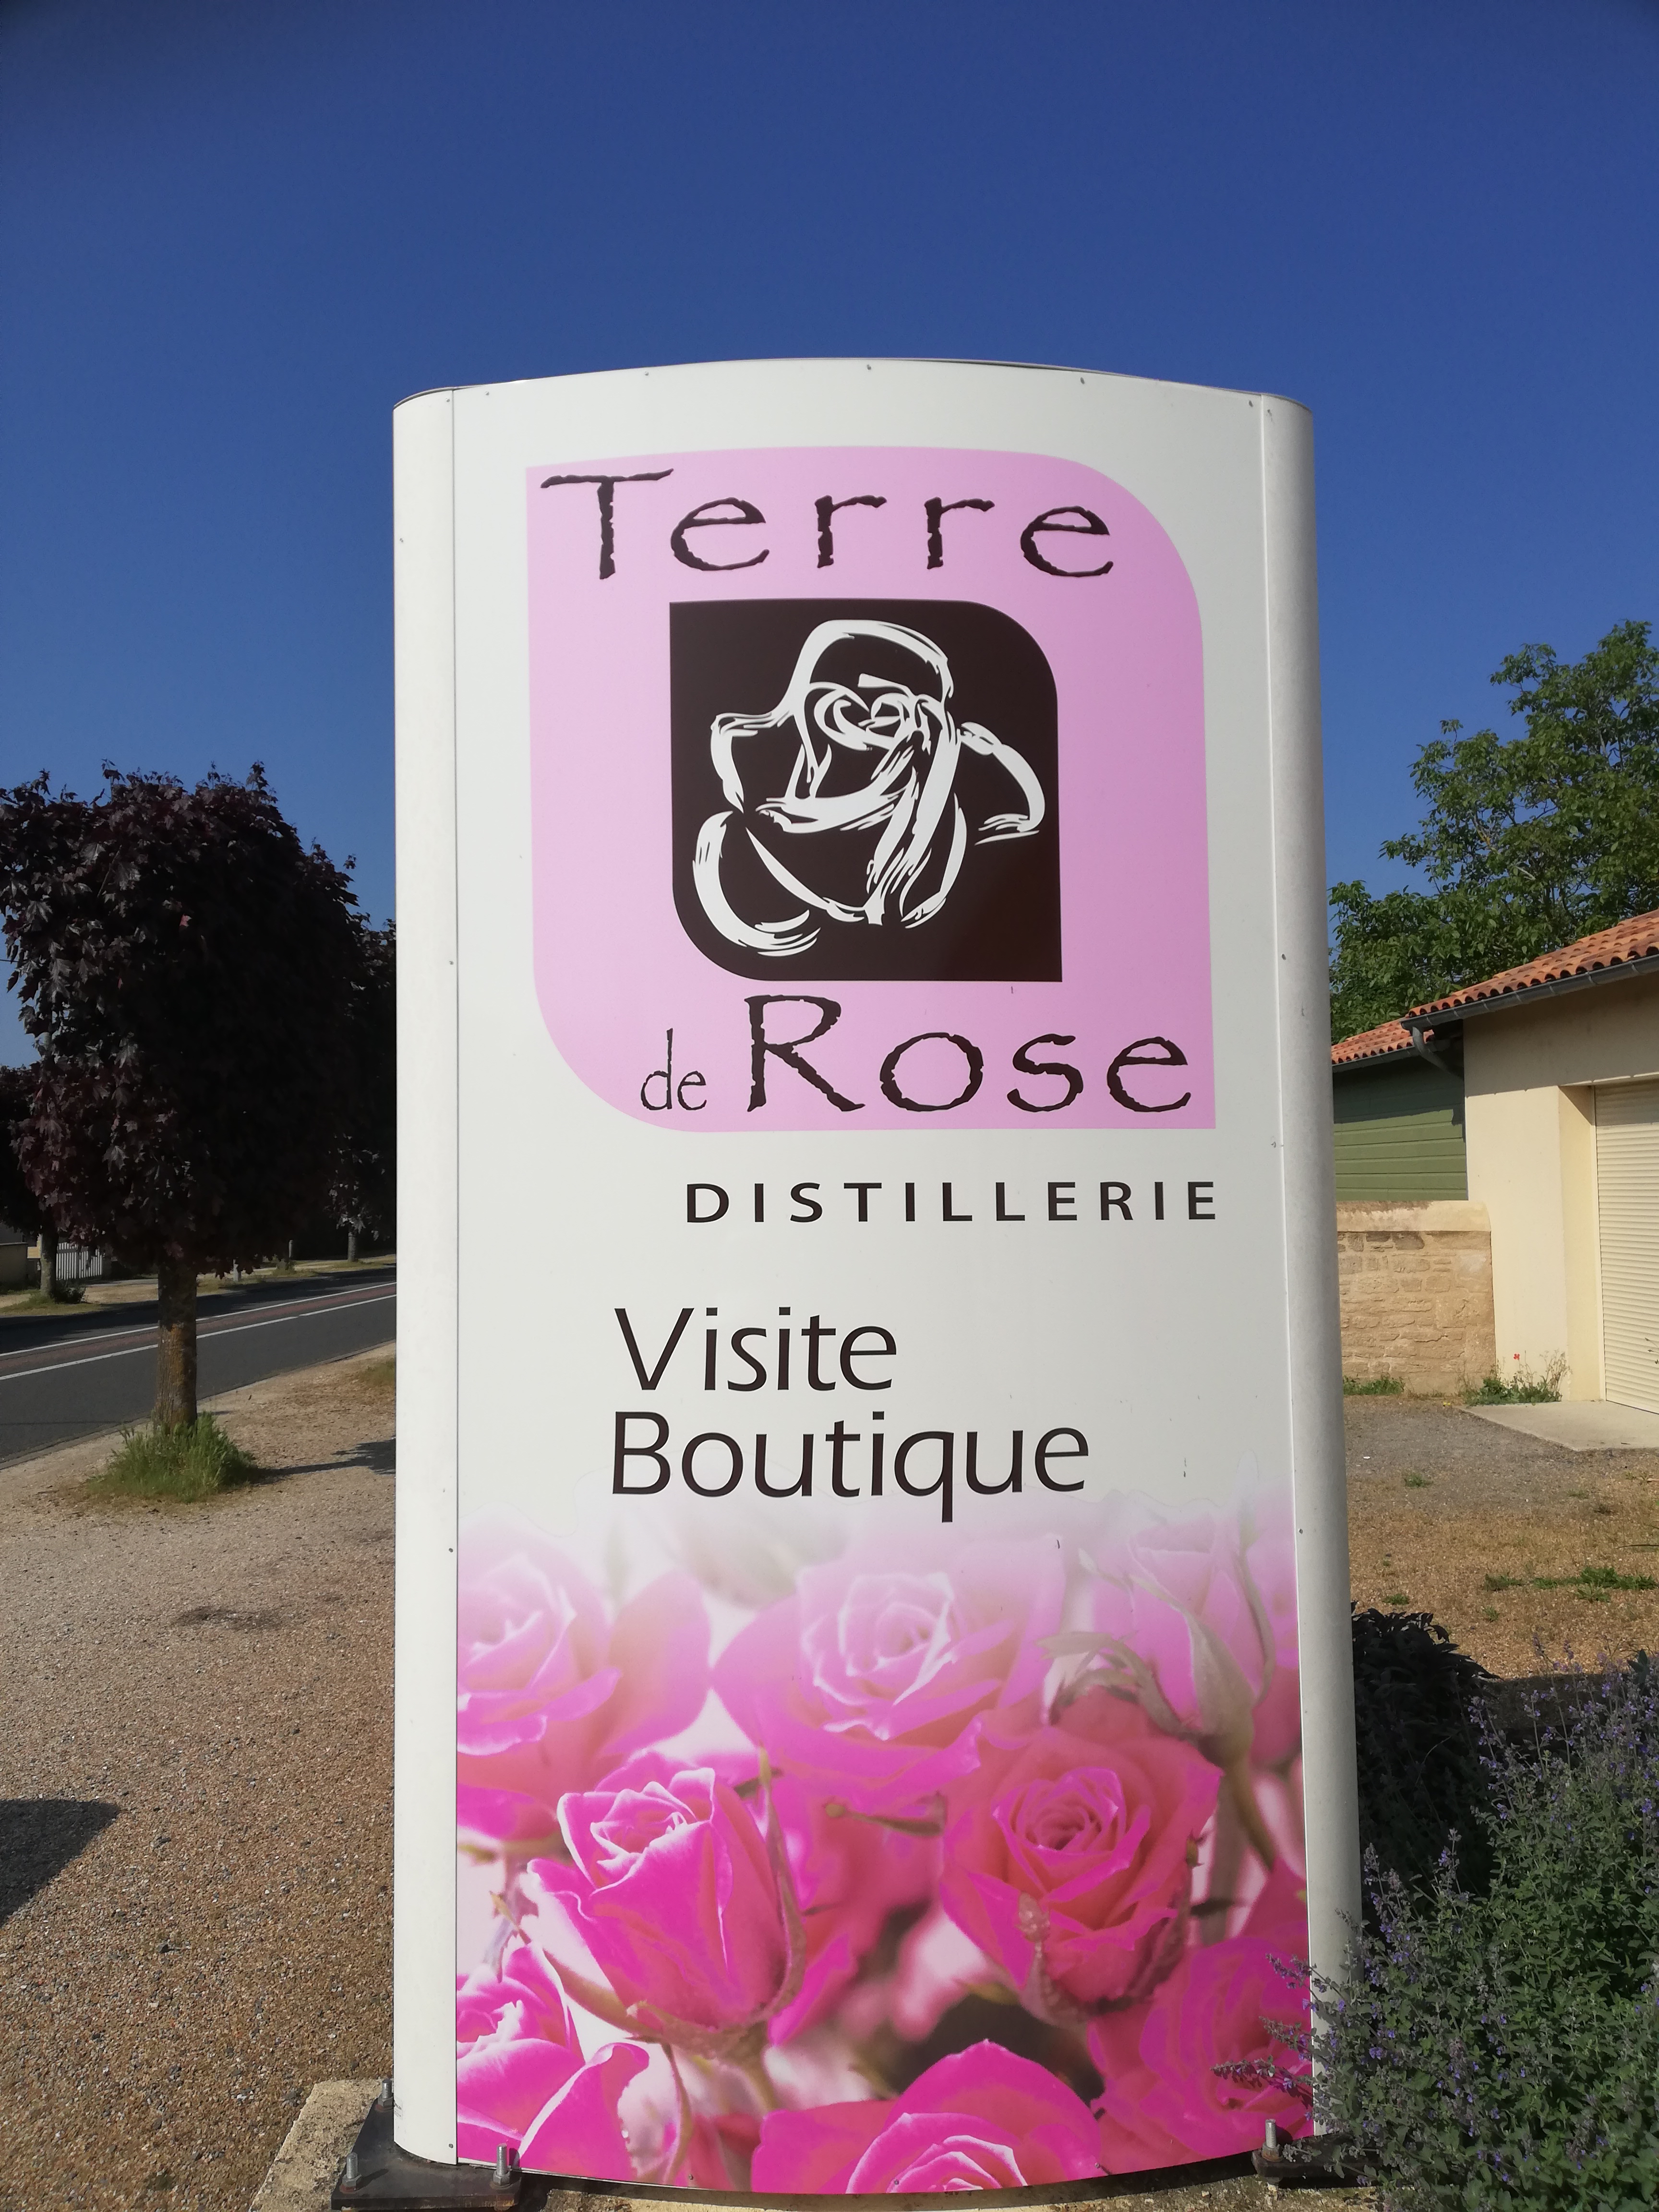 The shop of Terre de Rose : Buy Rose products!